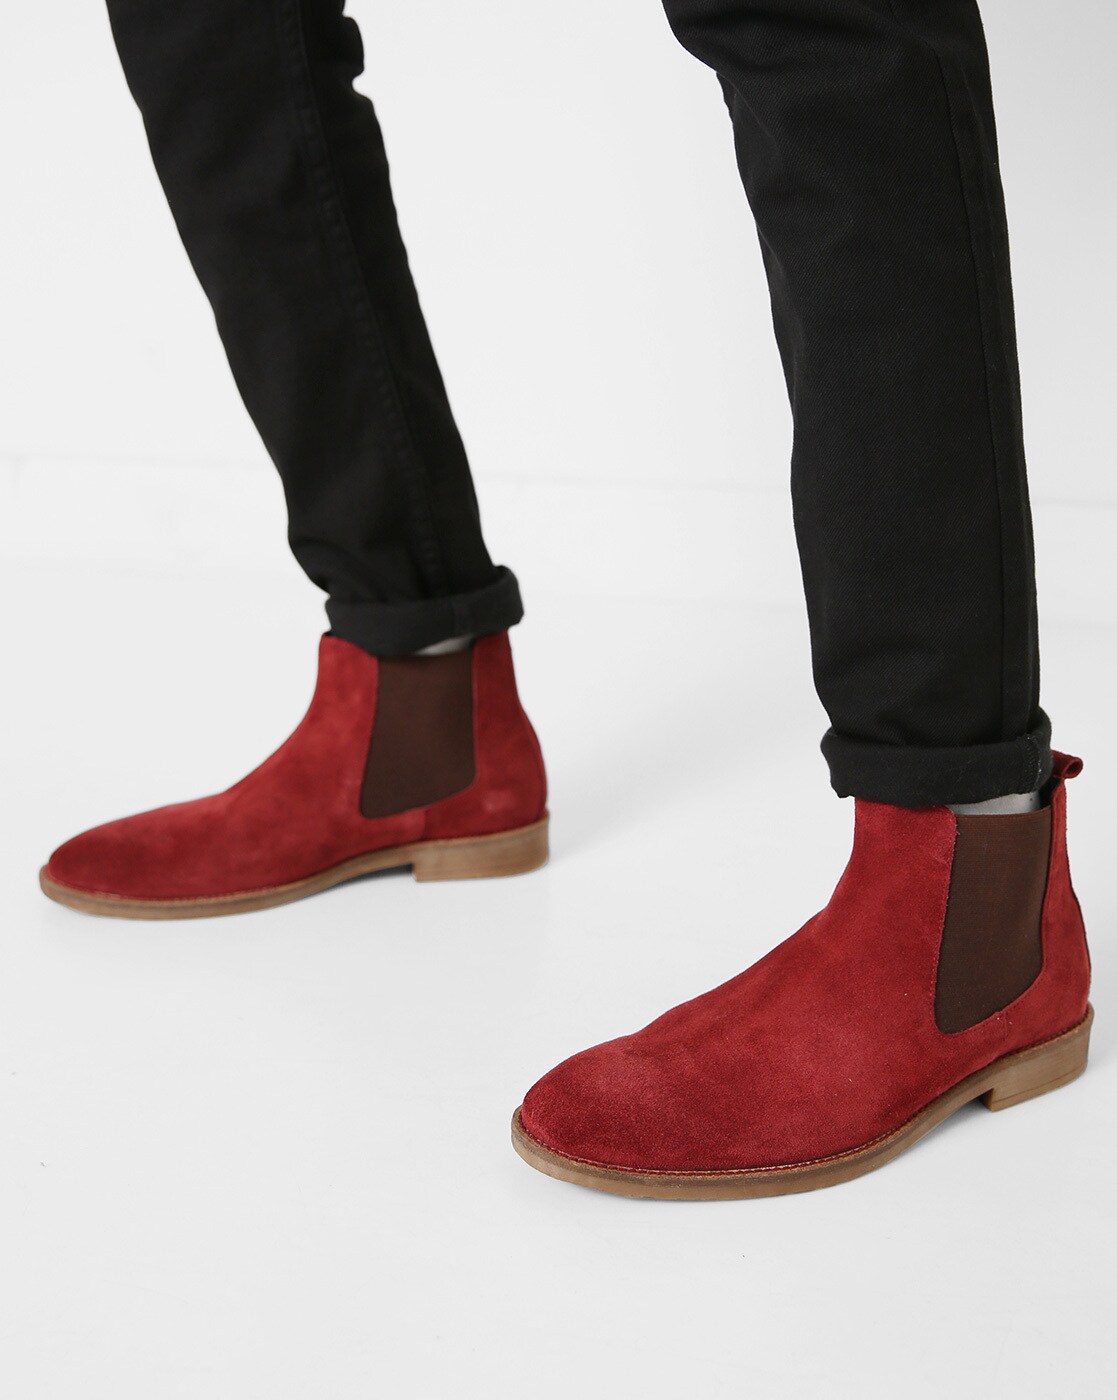 red suede chelsea boots